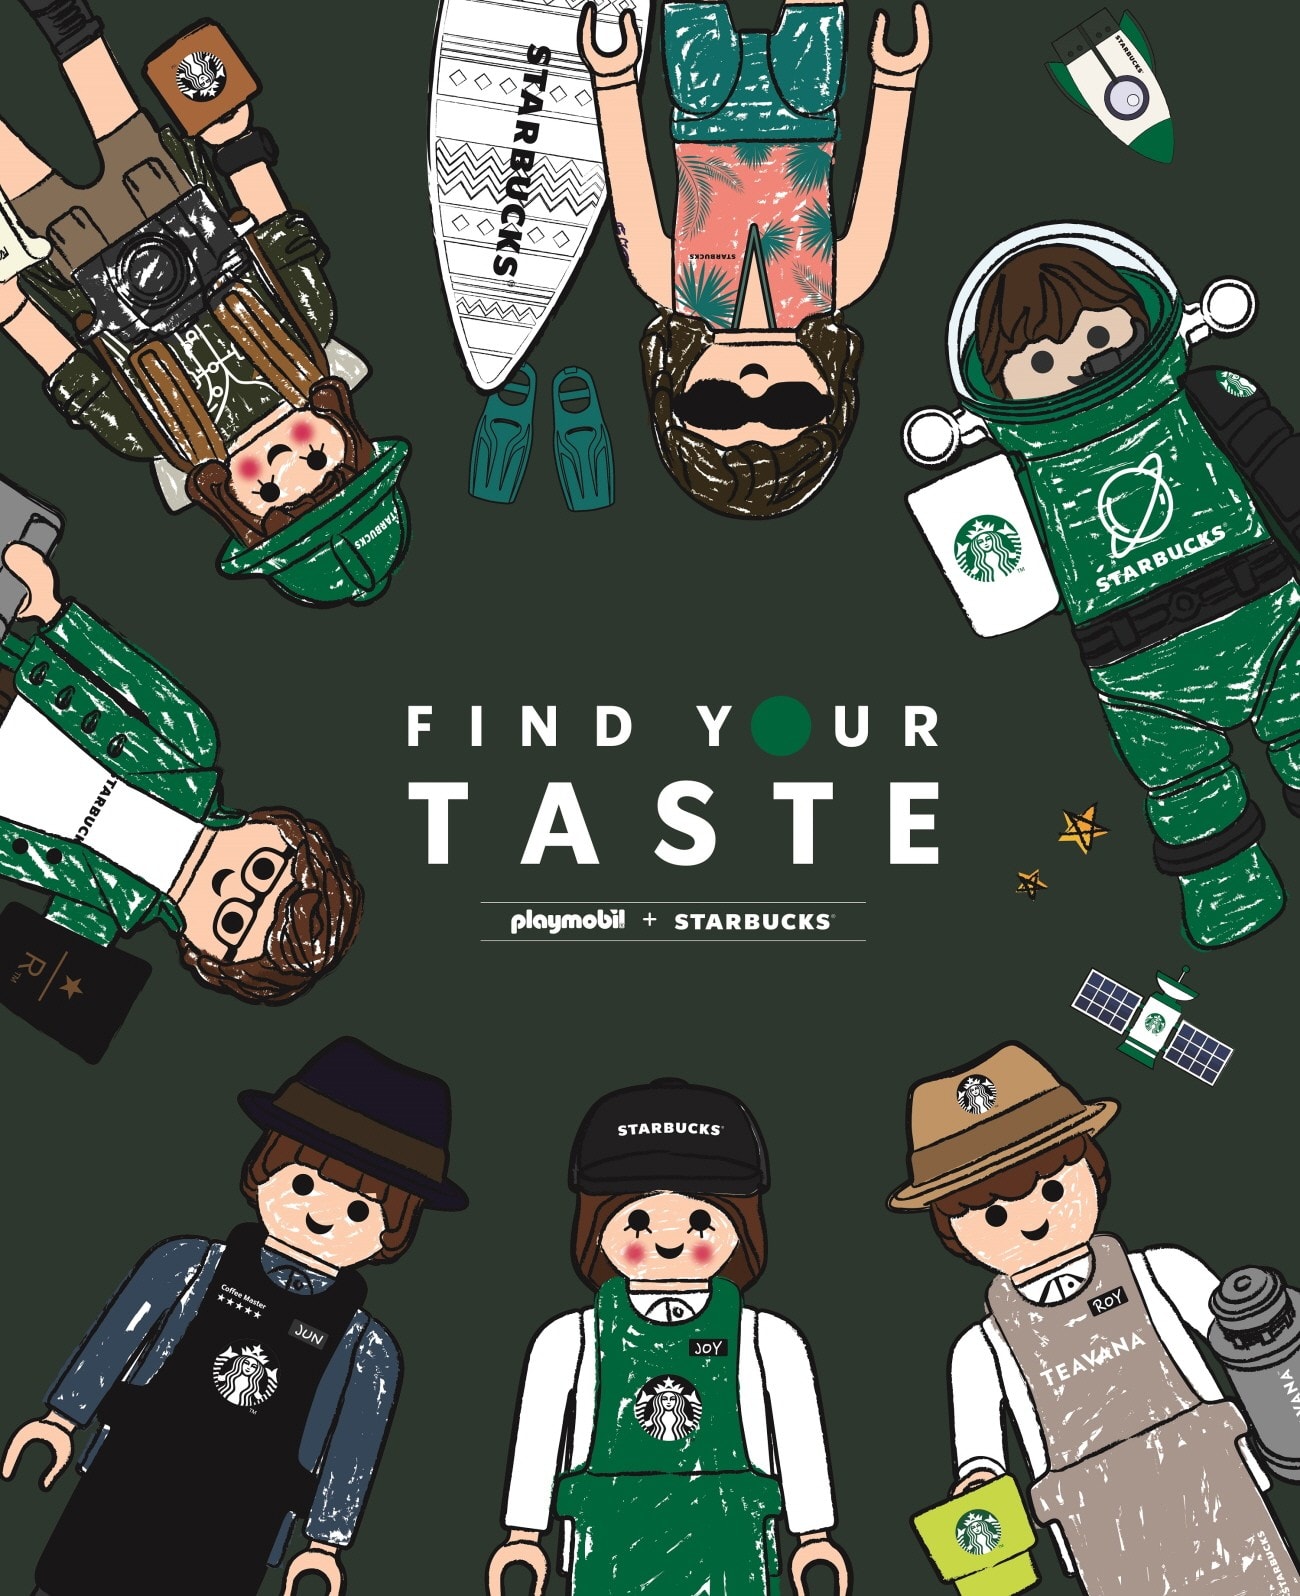 starbucks korea playmobil collaboration special edition figures toys find your taste characters illustrations drawings